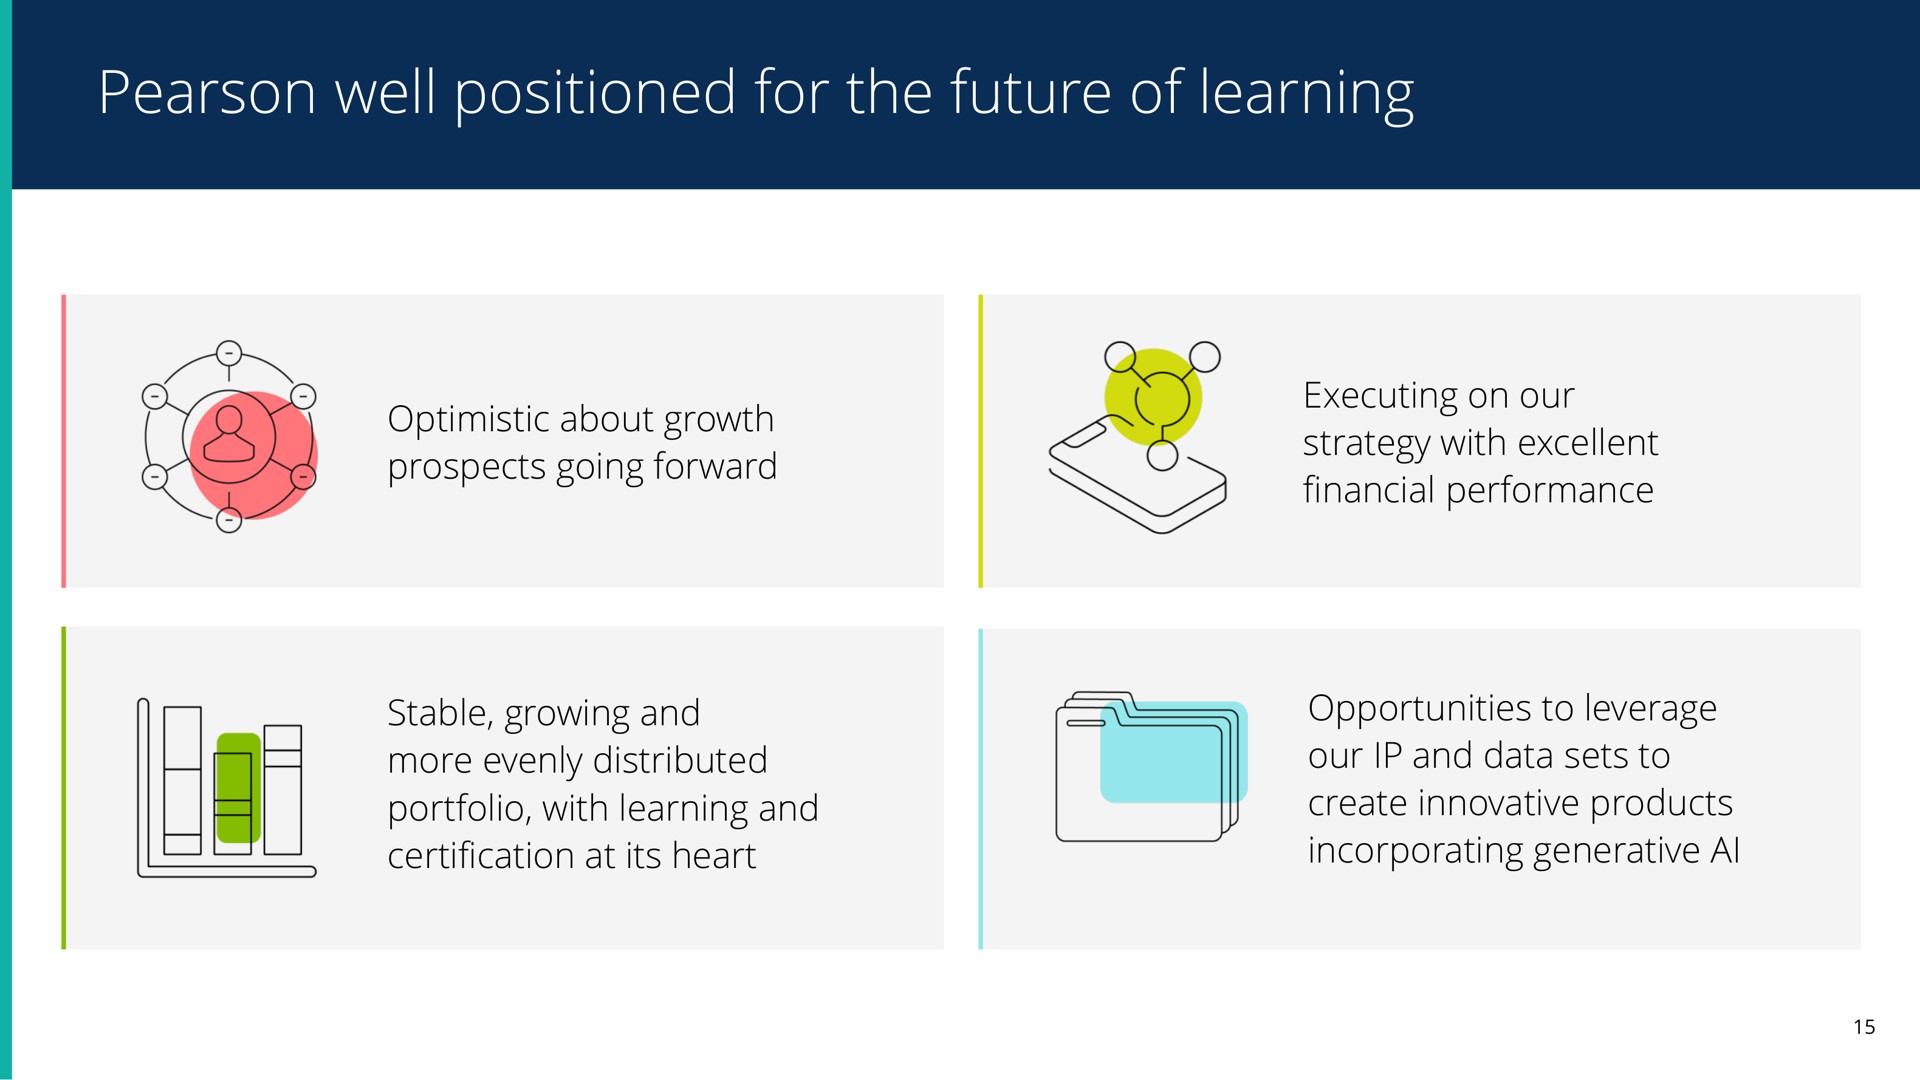 well positioned for the future of learning | Pearson